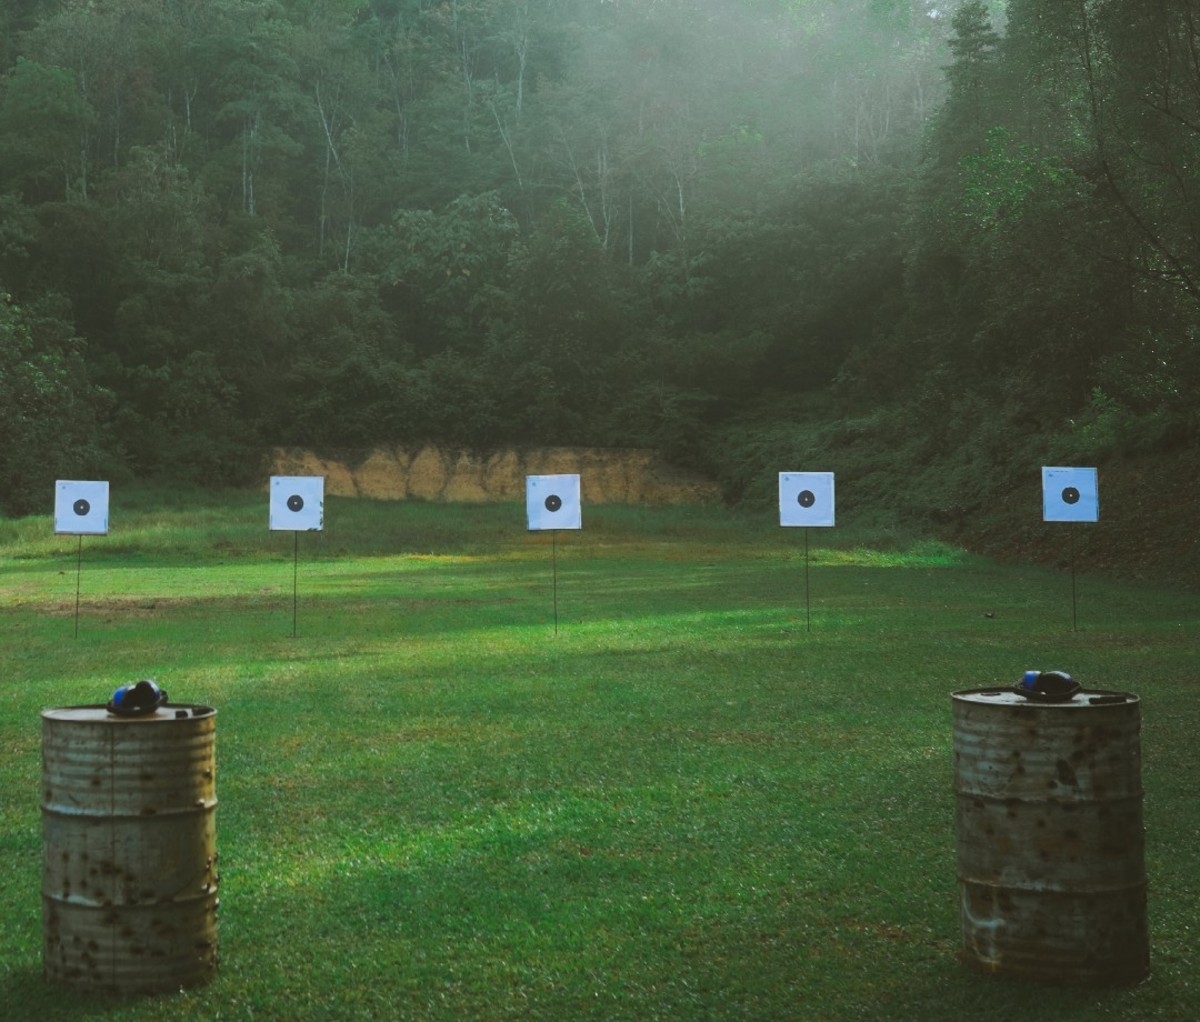 Outdoor grassy range with a line of targets.